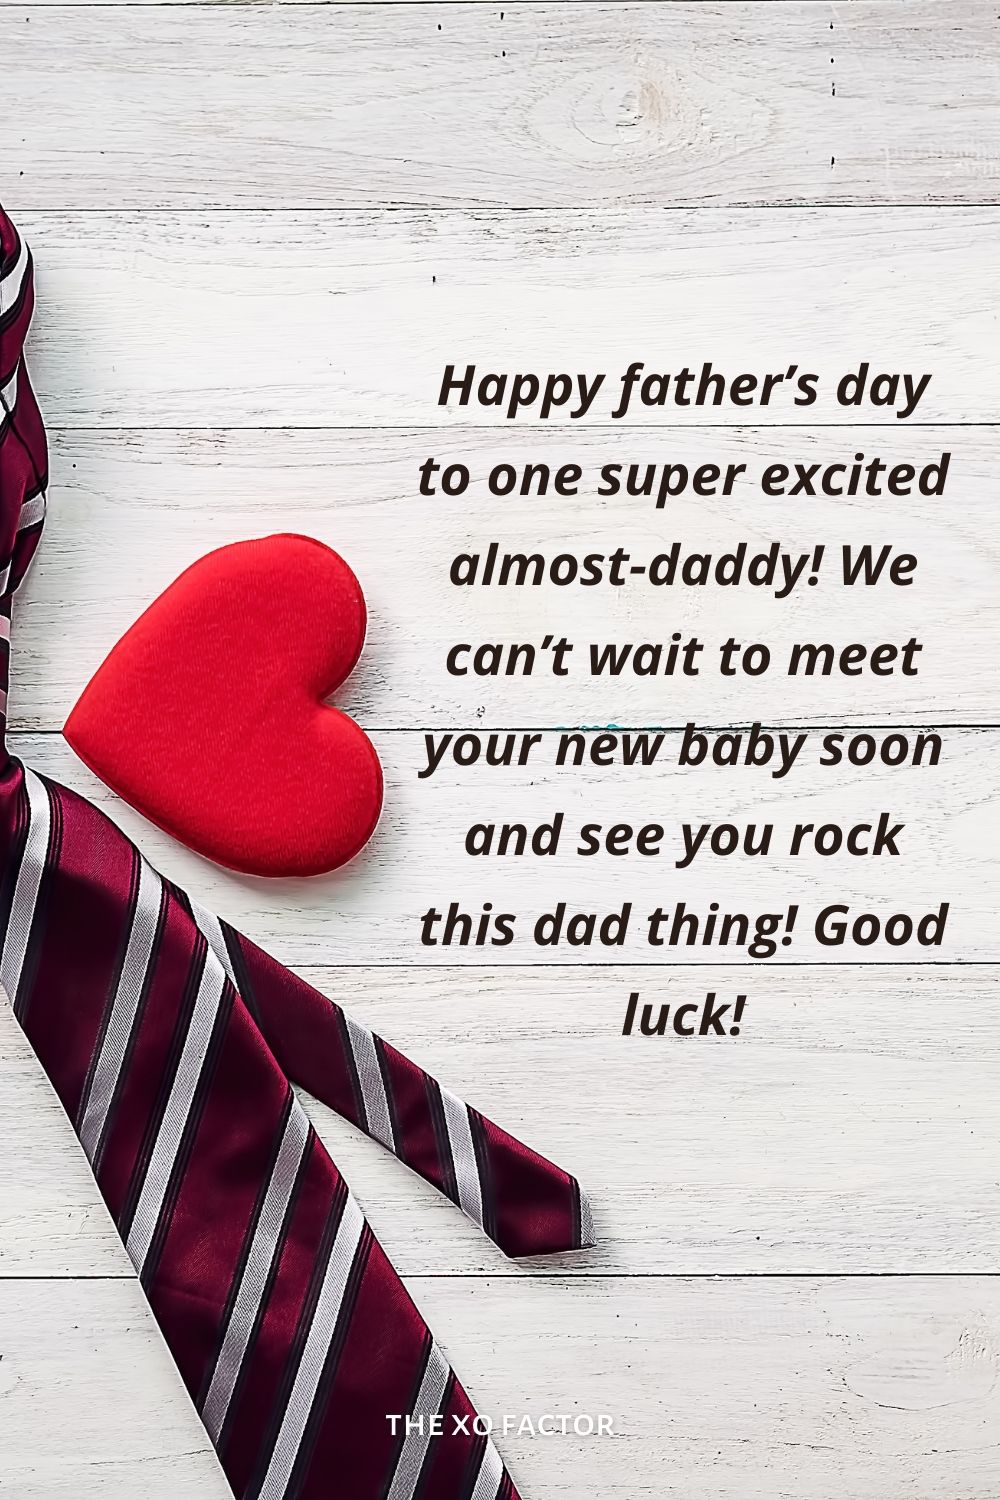 Happy father’s day to one super excited almost-daddy! We can’t wait to meet your new baby soon and see you rock this dad thing! Good luck!